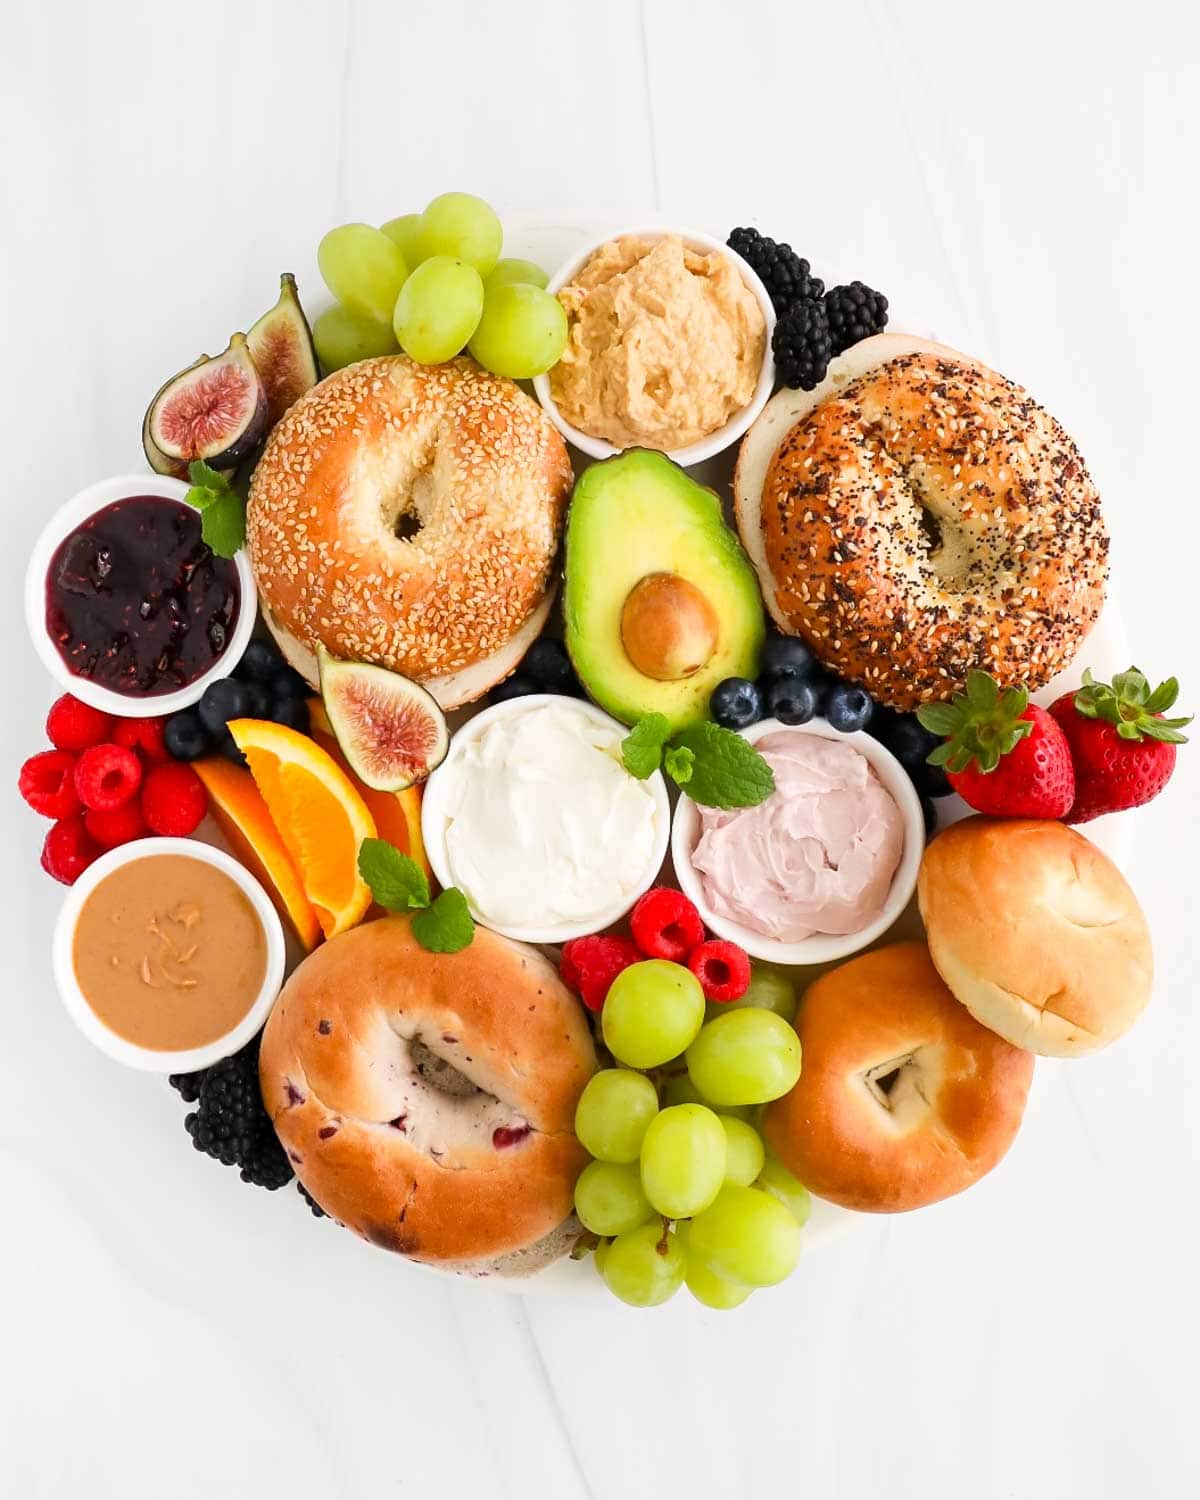 A board filled with different types of bagels, avocado, grapes, strawberries, raspberries, blueberries, oranges, blackberries, peanut butter, jelly, cream cheese, and fresh mint.